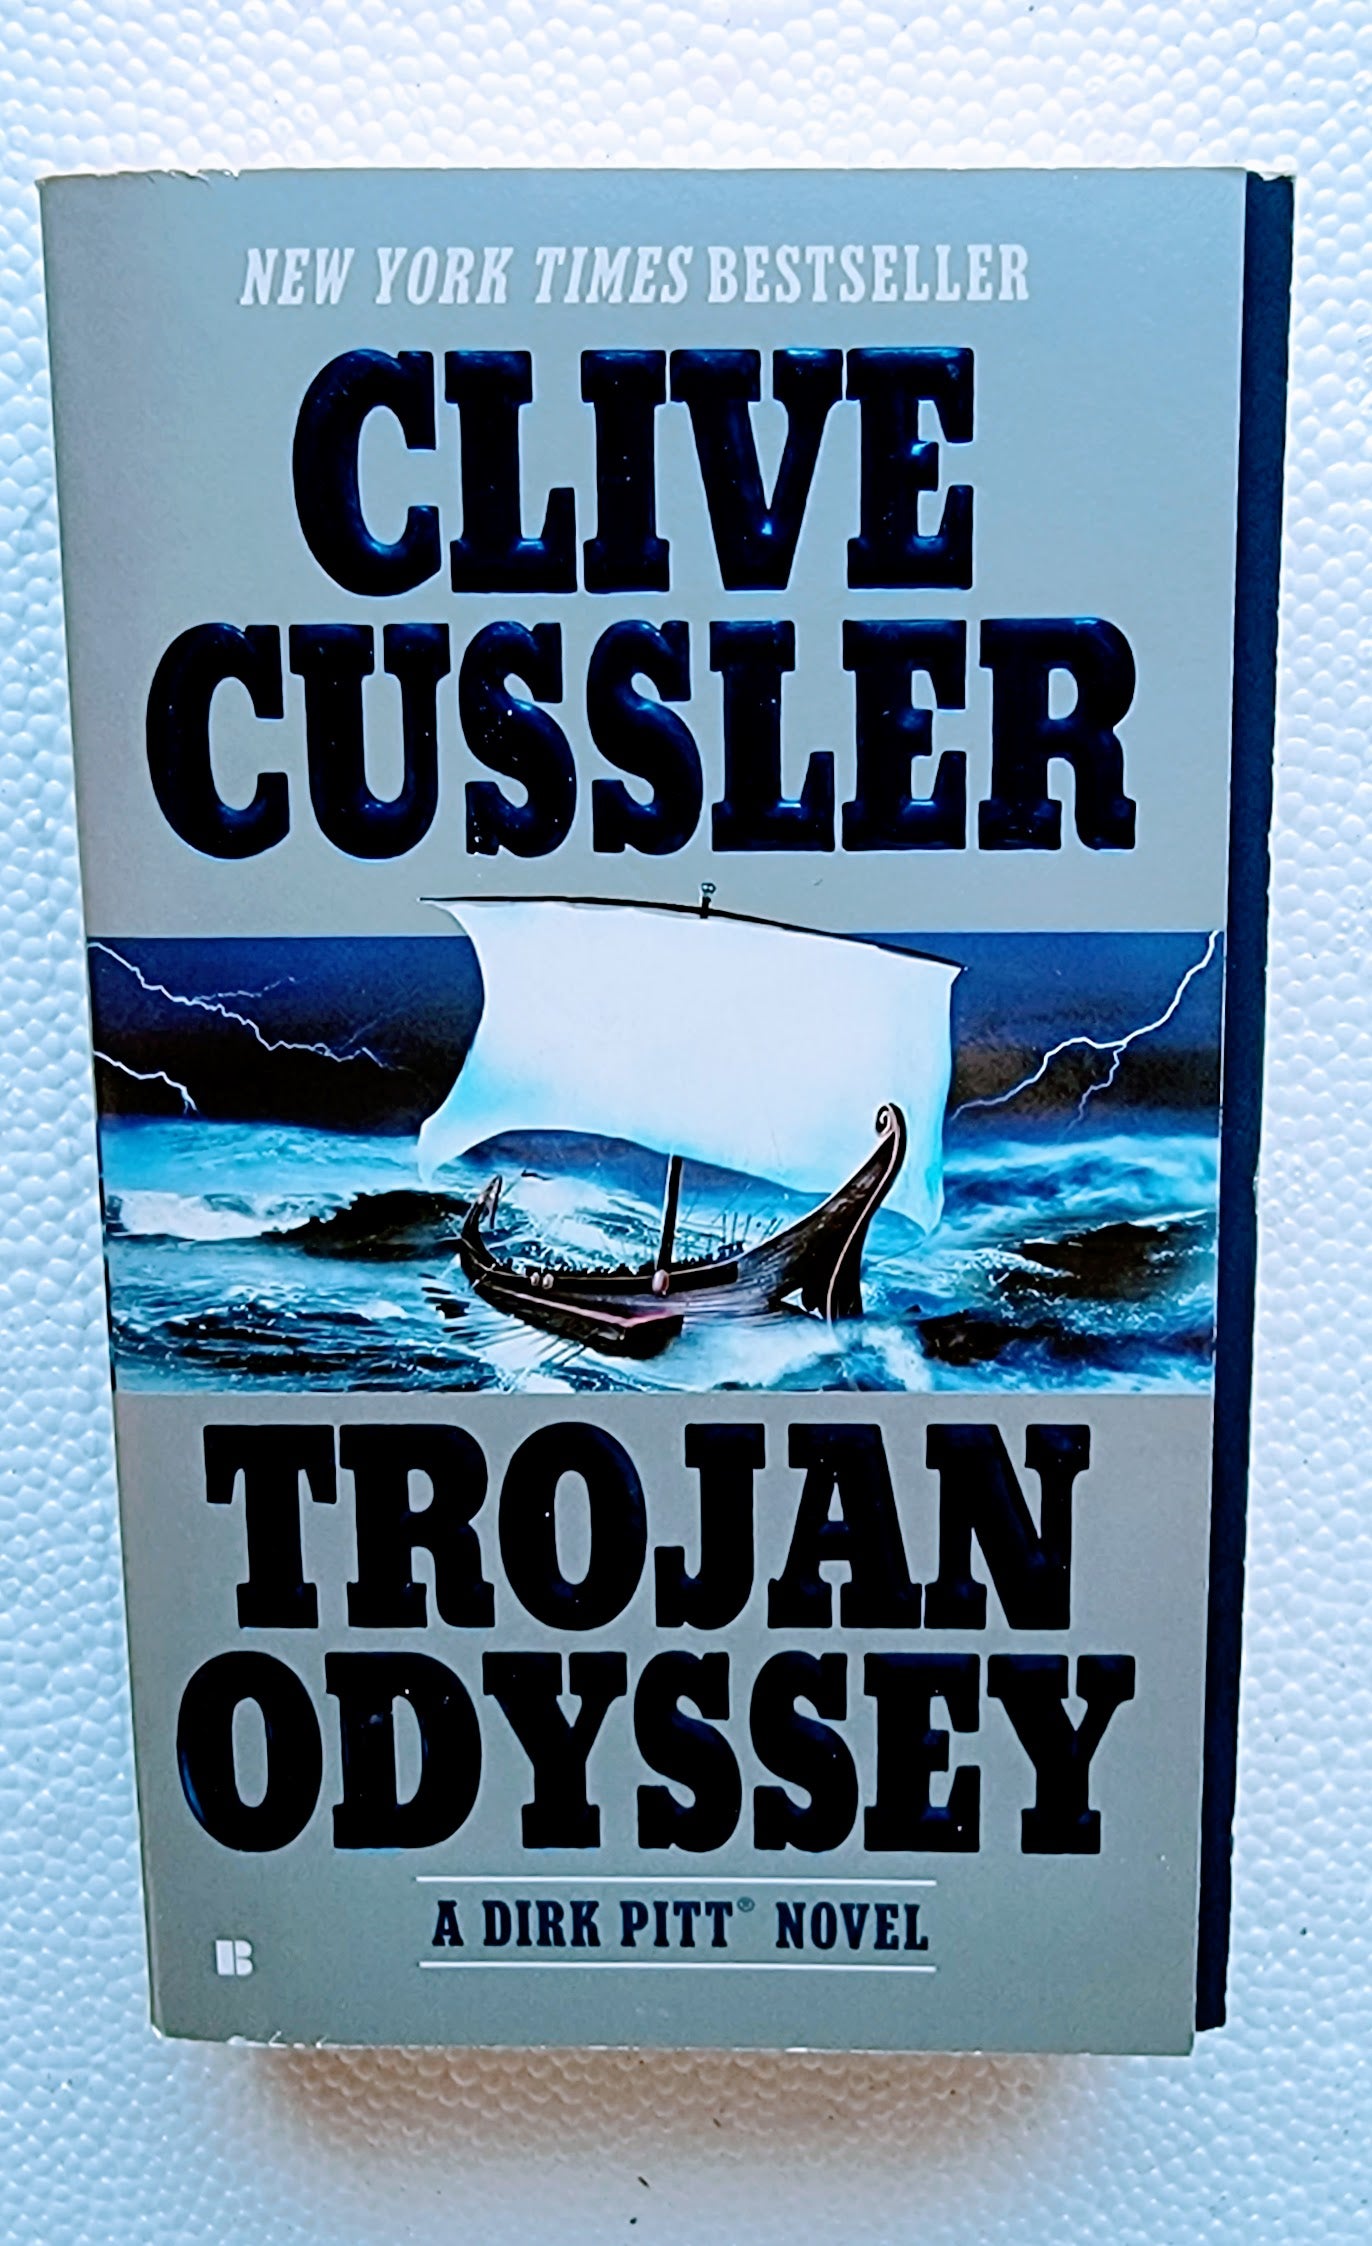 Trojan Odyssey: A Dirk Pitt Novel Series Book by Clive Cussler  Xclusive Collectibles   